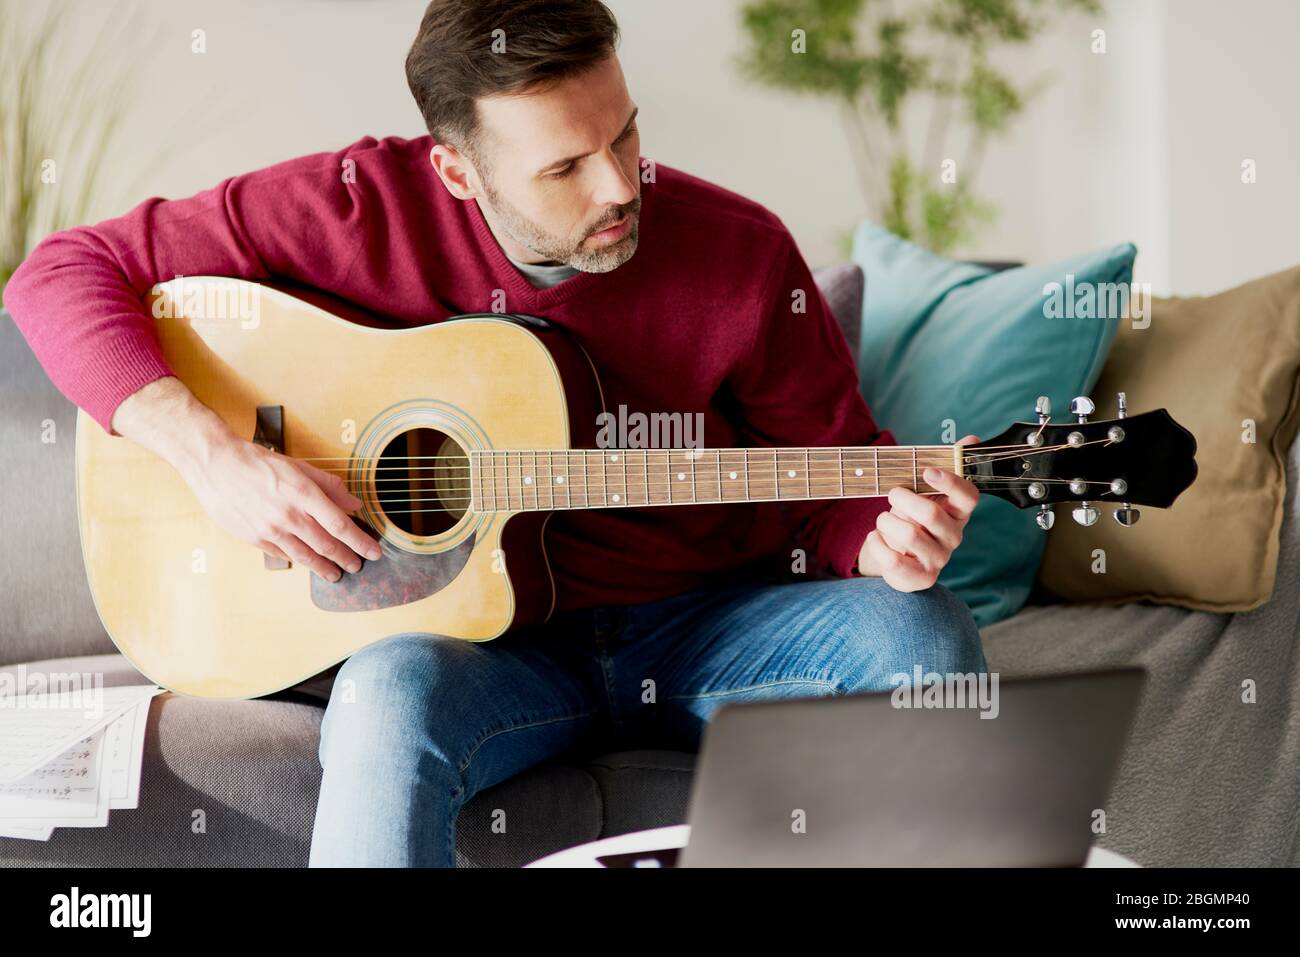 Mid age man playing an acoustic guitar Stock Photo